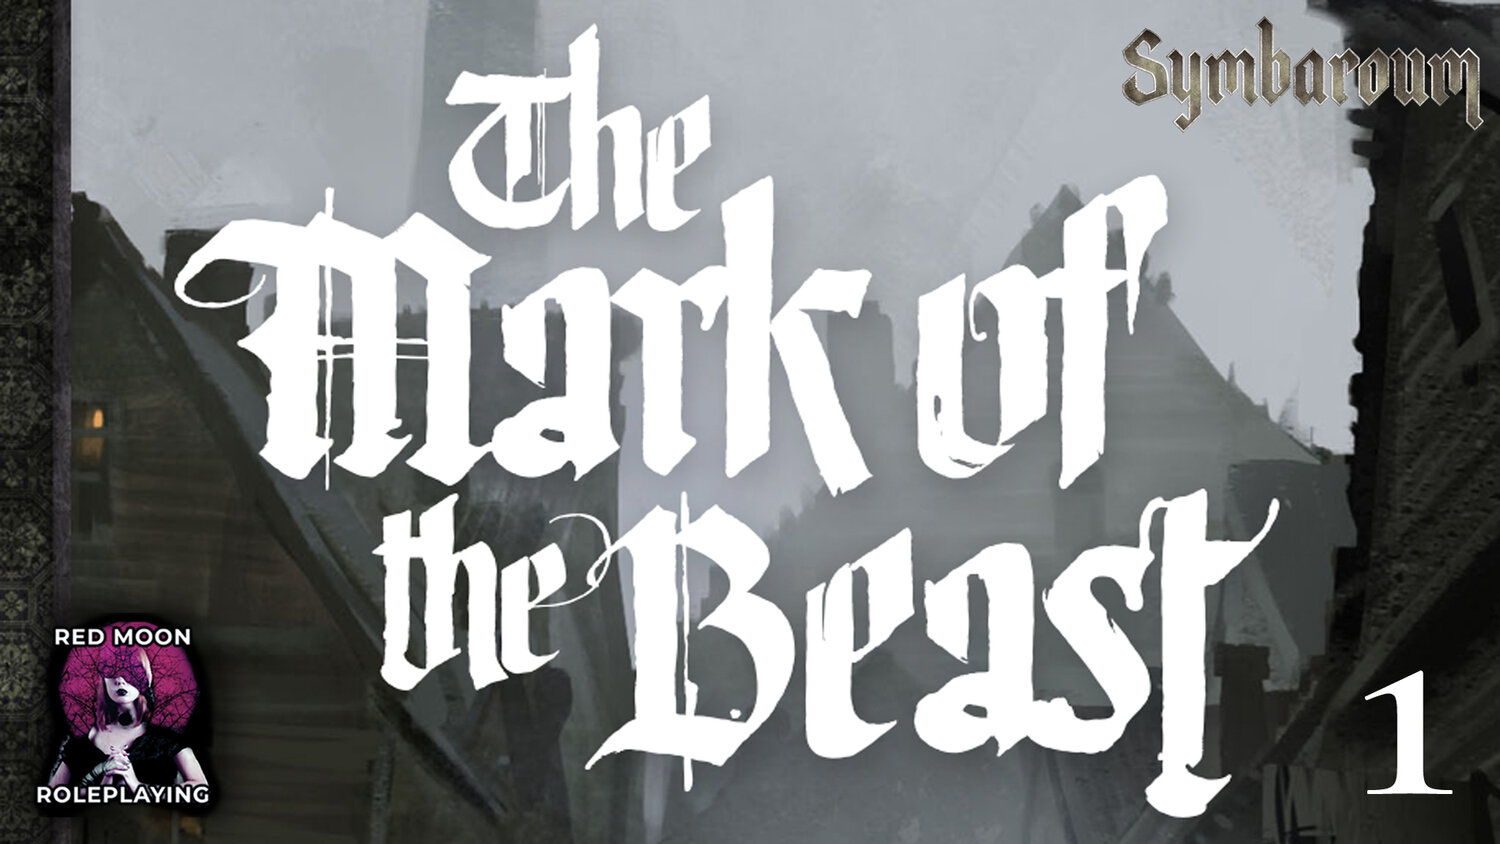 Symbaroum, The Mark of the Beast 01: Vernam - Red Moon Roleplaying.